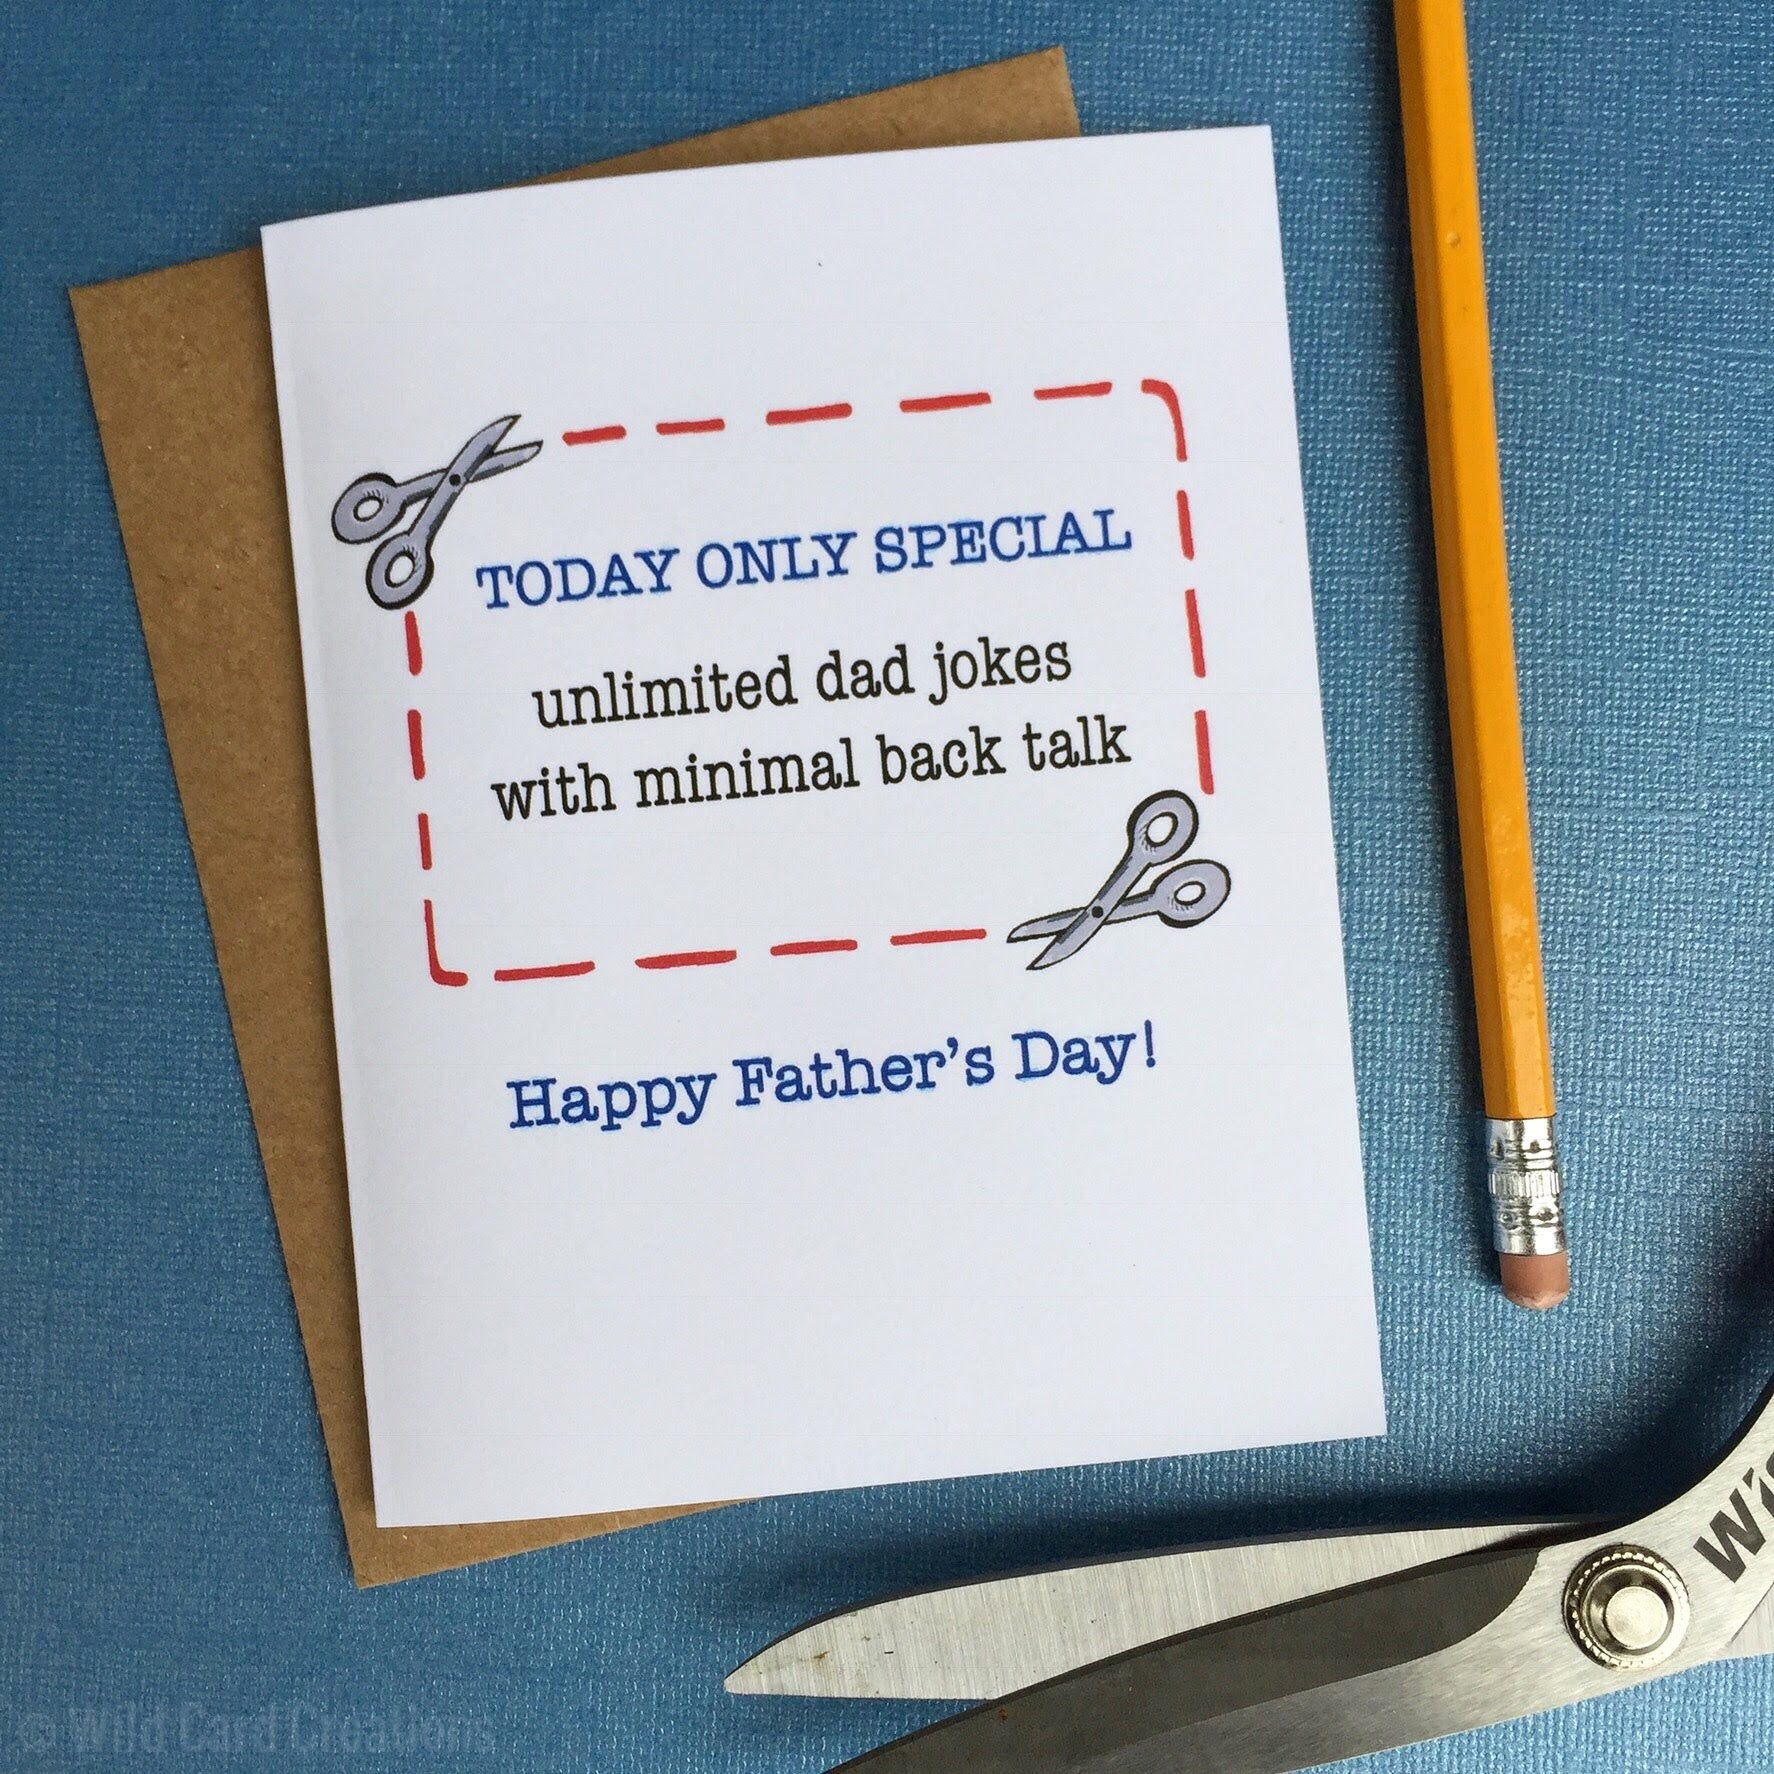 Today Only Special Unlimited Dad Jokes With Minimal Back Talk - Happy Father's Day Greeting Card - Mellow Monkey